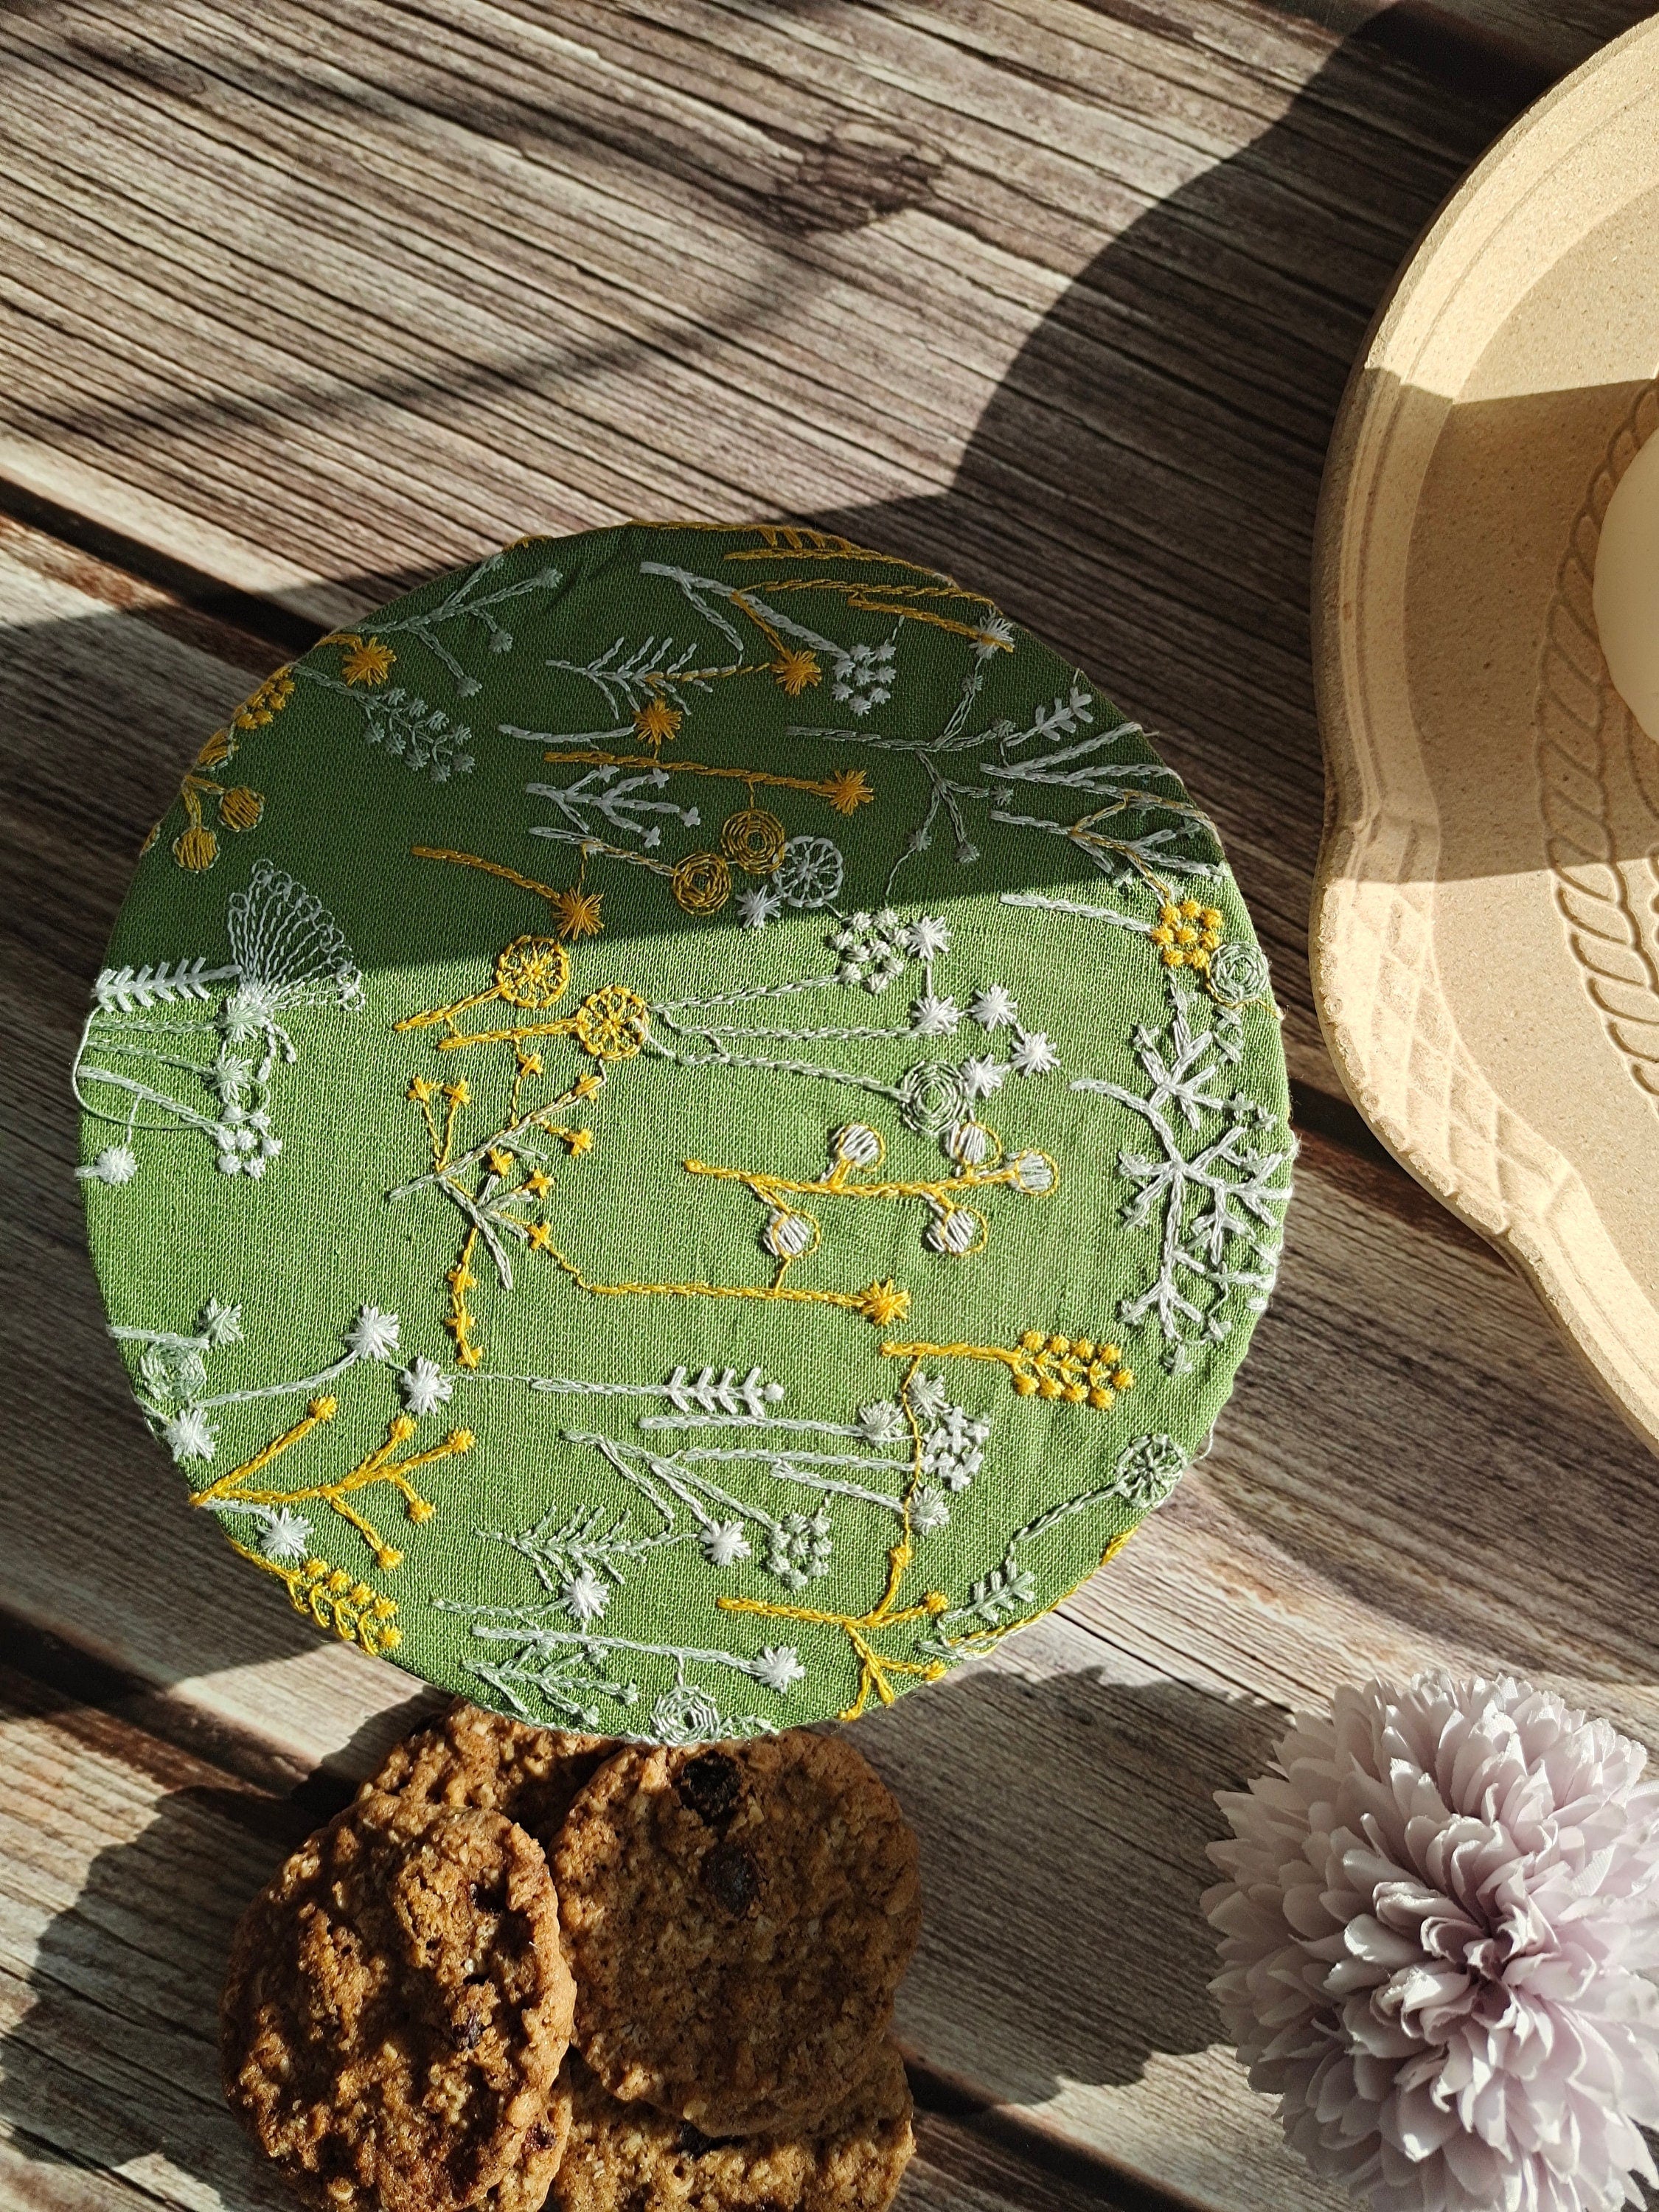 Reusable Bowl Covers Bread Proofing Cover Bread Baking Supplies, Washable Zero Waste Swap, Christmas Gift housewarming embroidery leaves